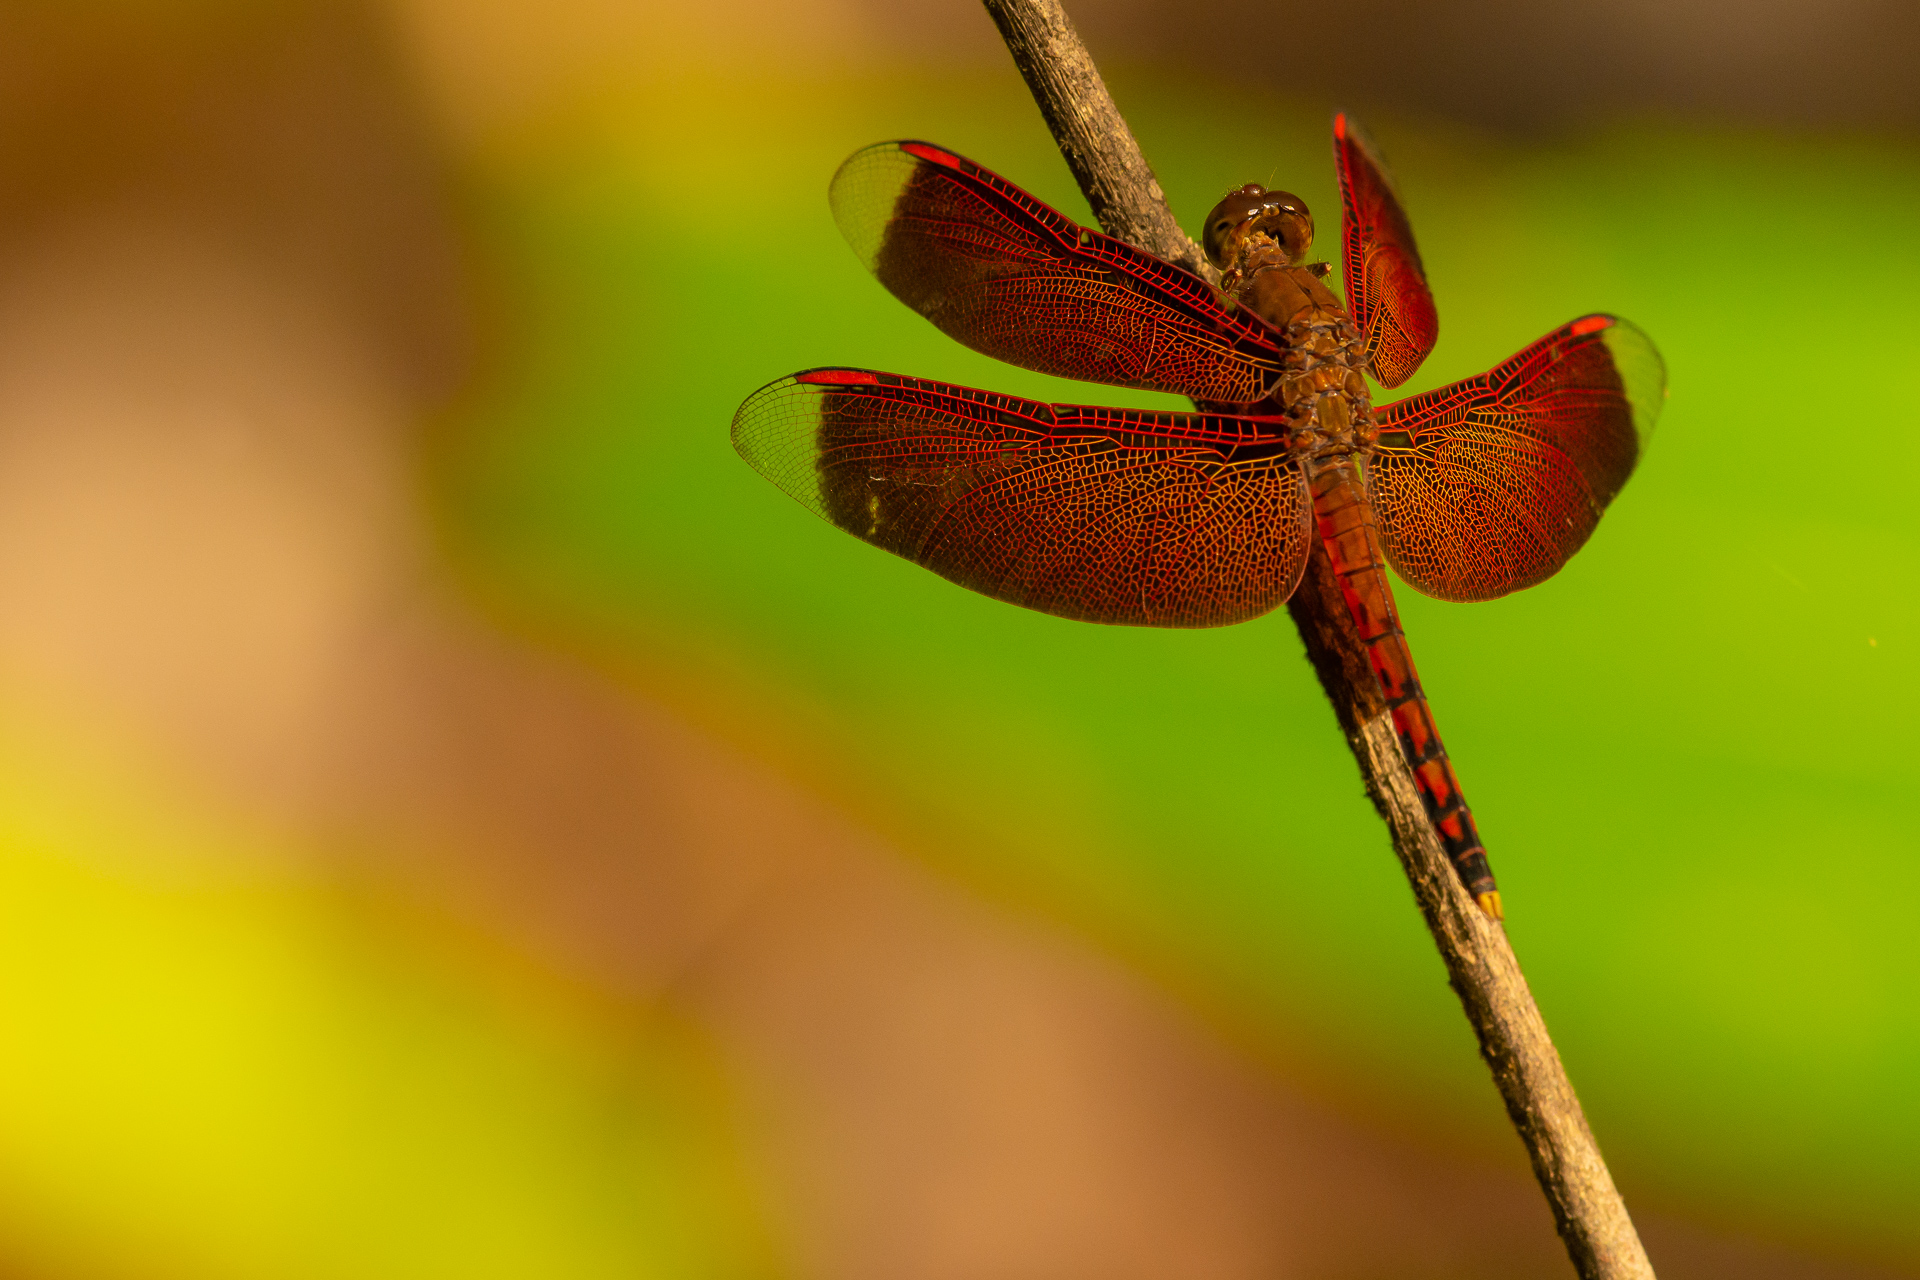 The colors of the dragonfly...